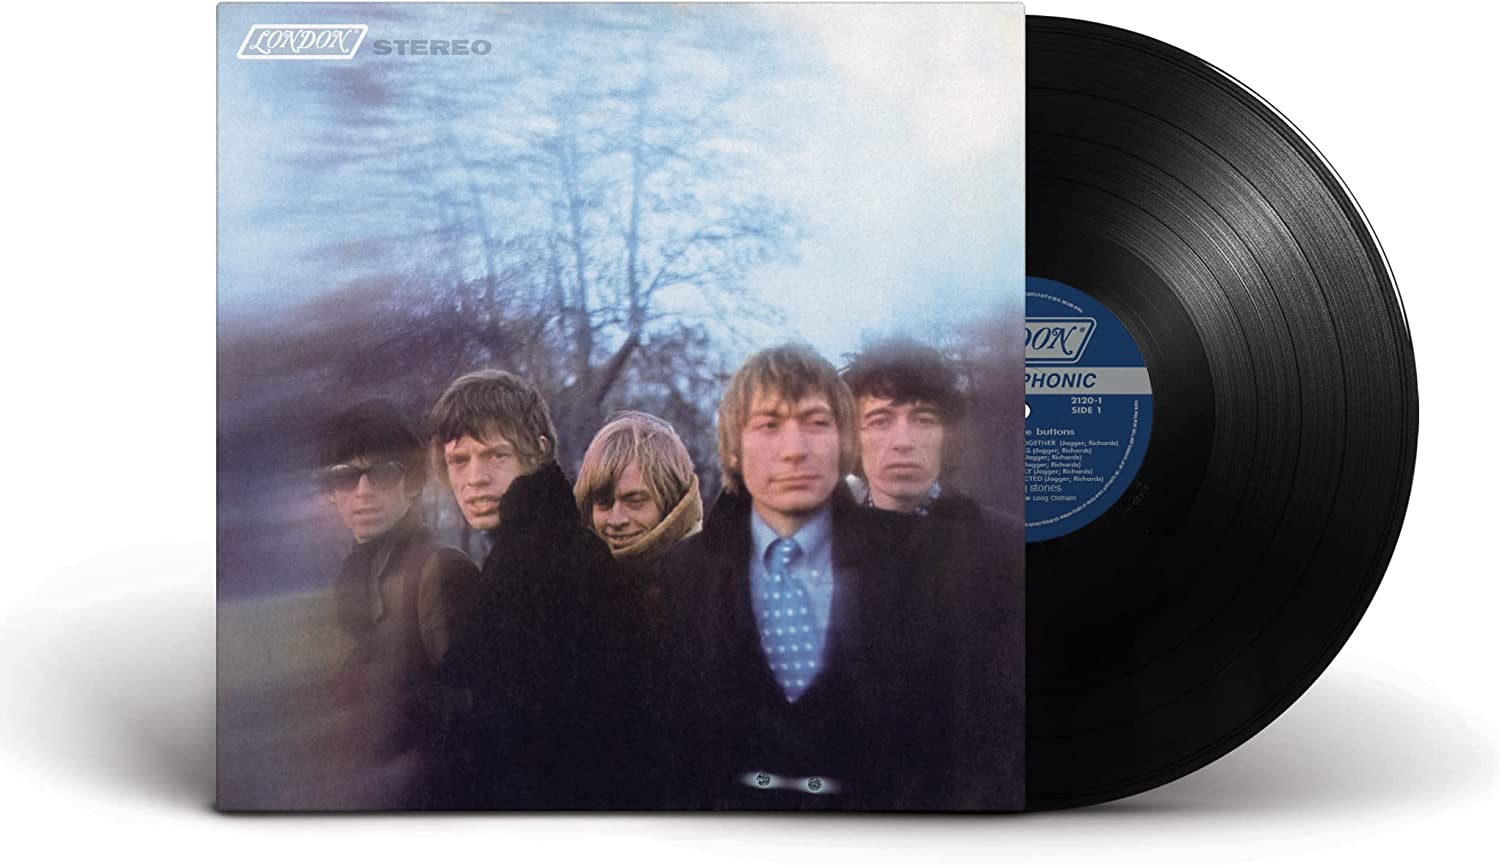 Between The Buttons (US Edition) - Vinyl